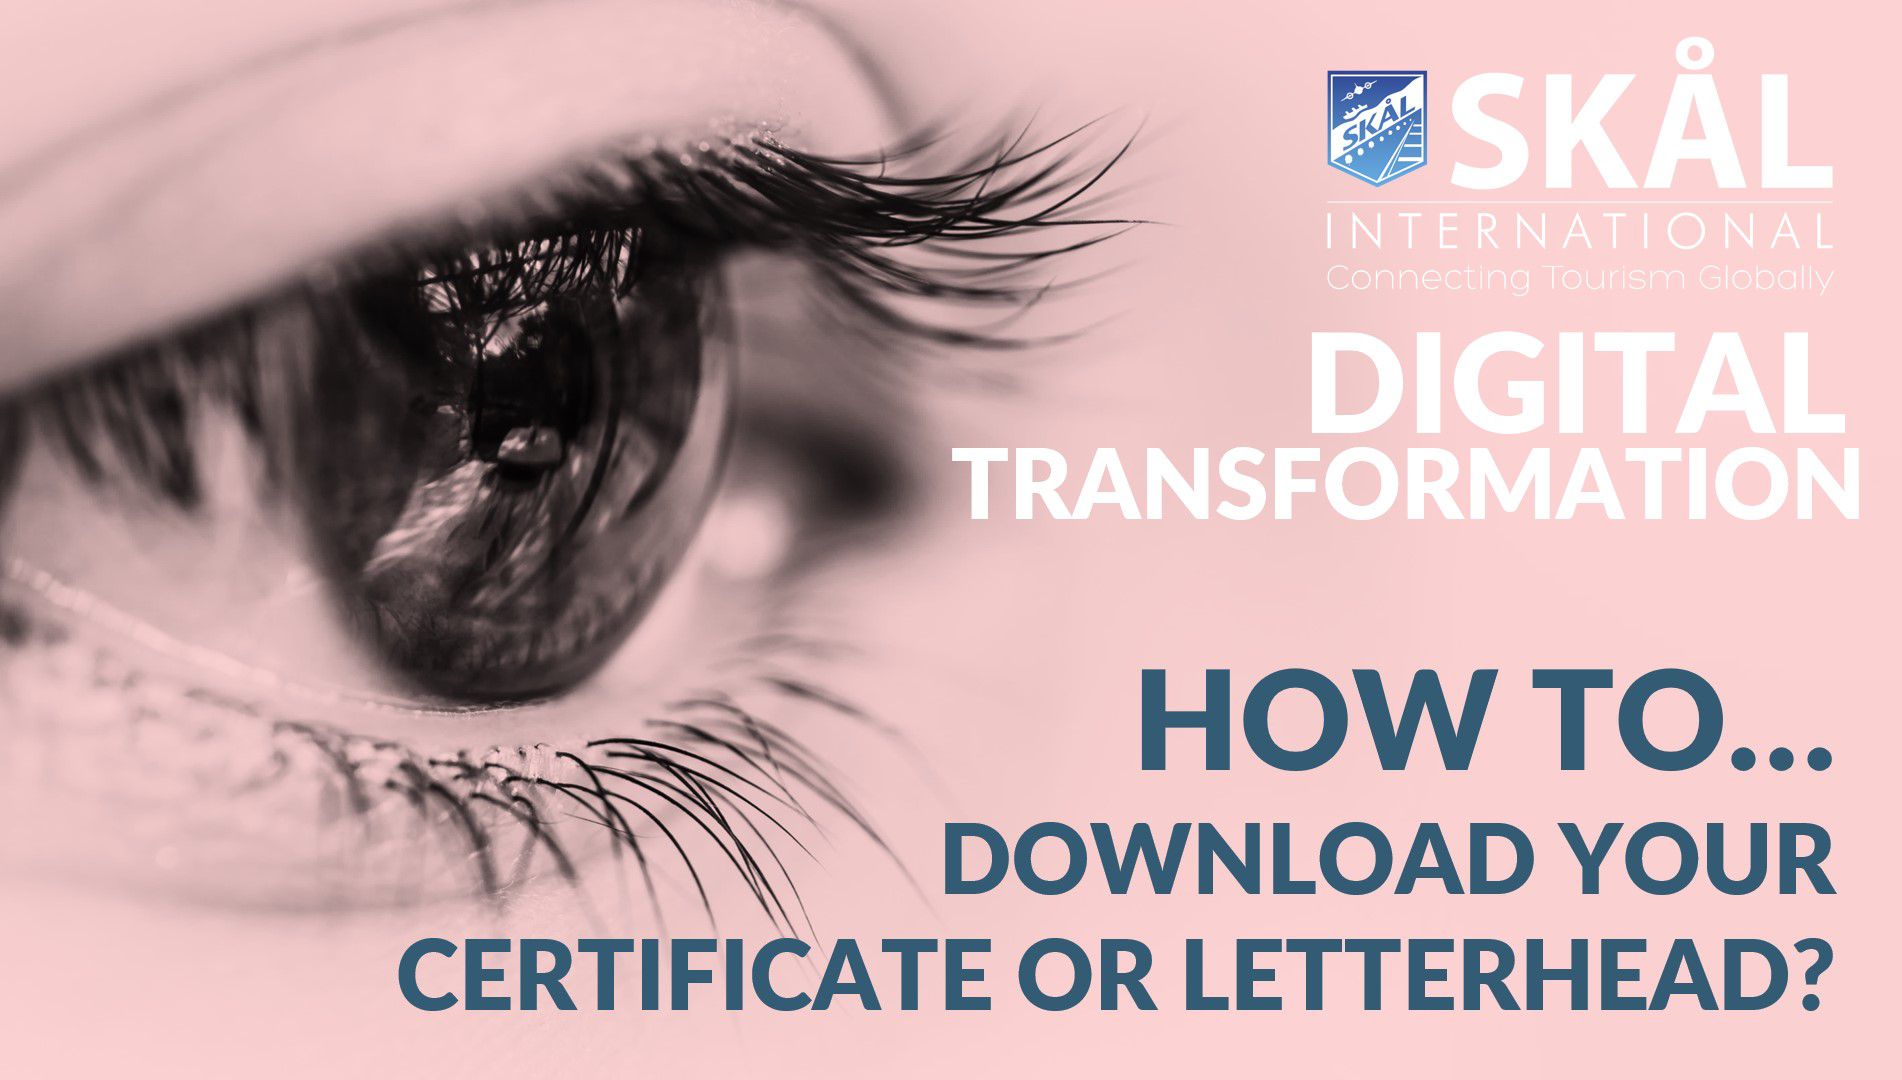 How to download your certificate or letterhead